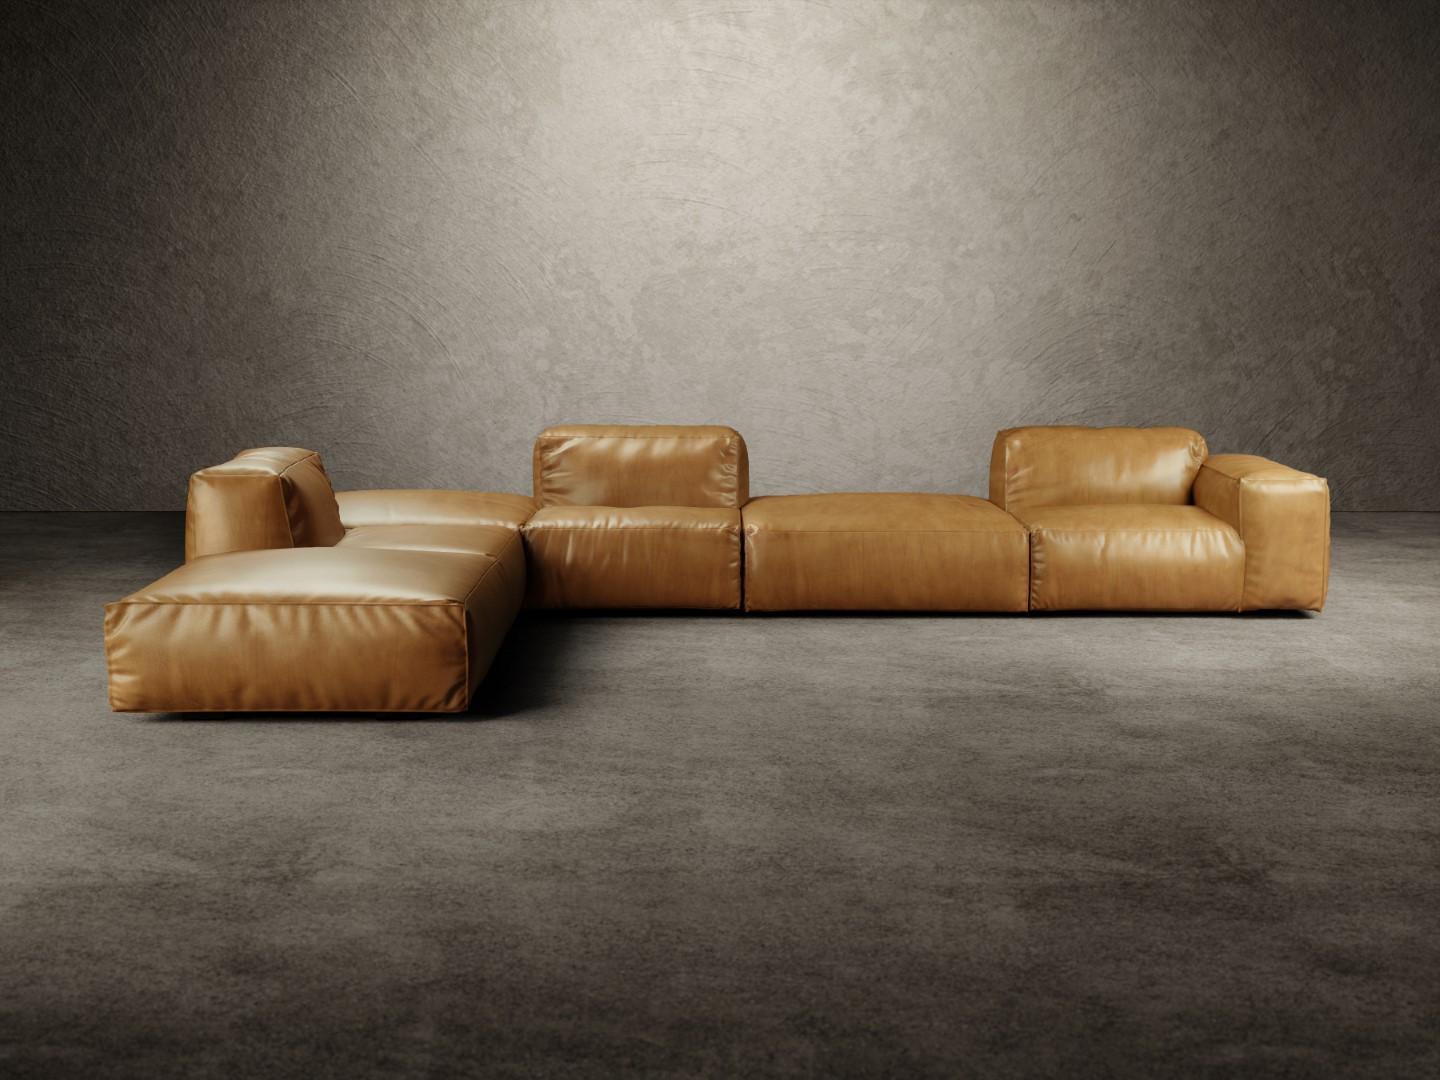 Rencontre Moi modular sofa is composed of a wooden shell padded with different densities polyurethane foam with a top layer in memory foam. The sofa is completely covered in fabric or leather. 
Rencontre Moi can be configurated by choosing from five